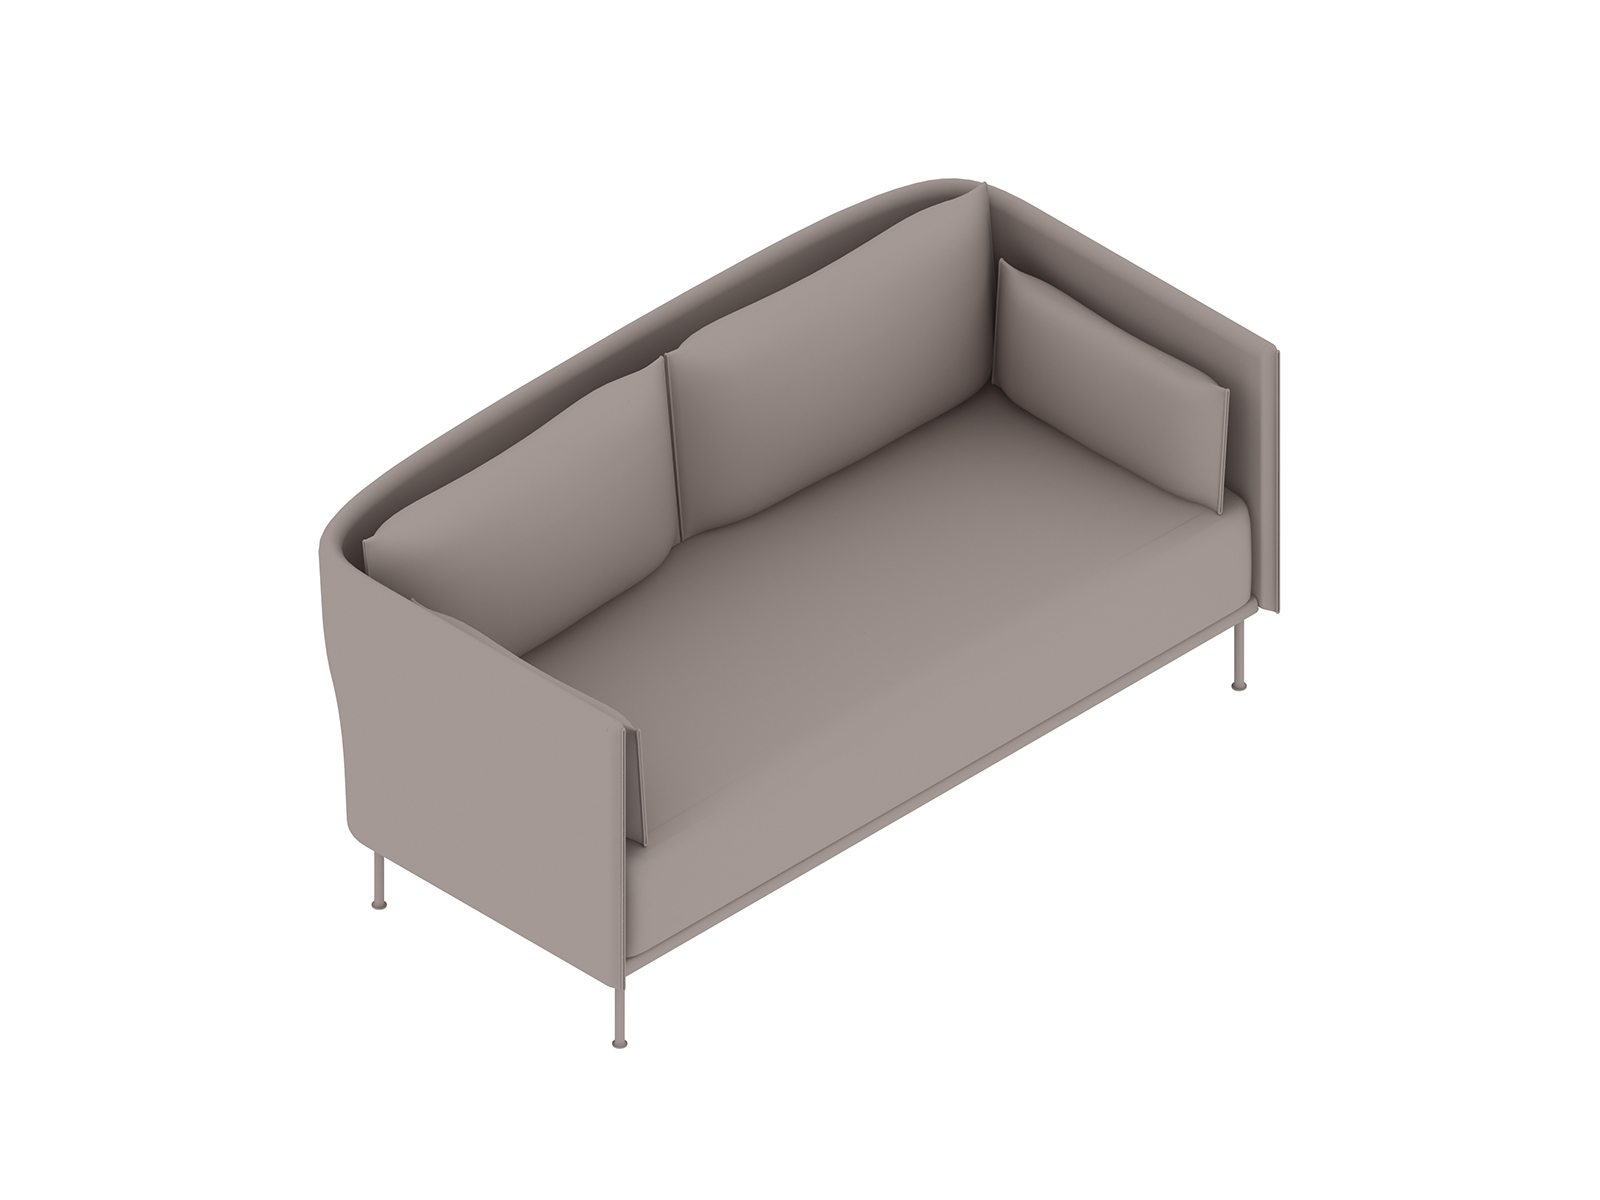 Agricultural battle Tend Silhouette Sofa–Low Back–3 Seat - 3D Product Models - Herman Miller